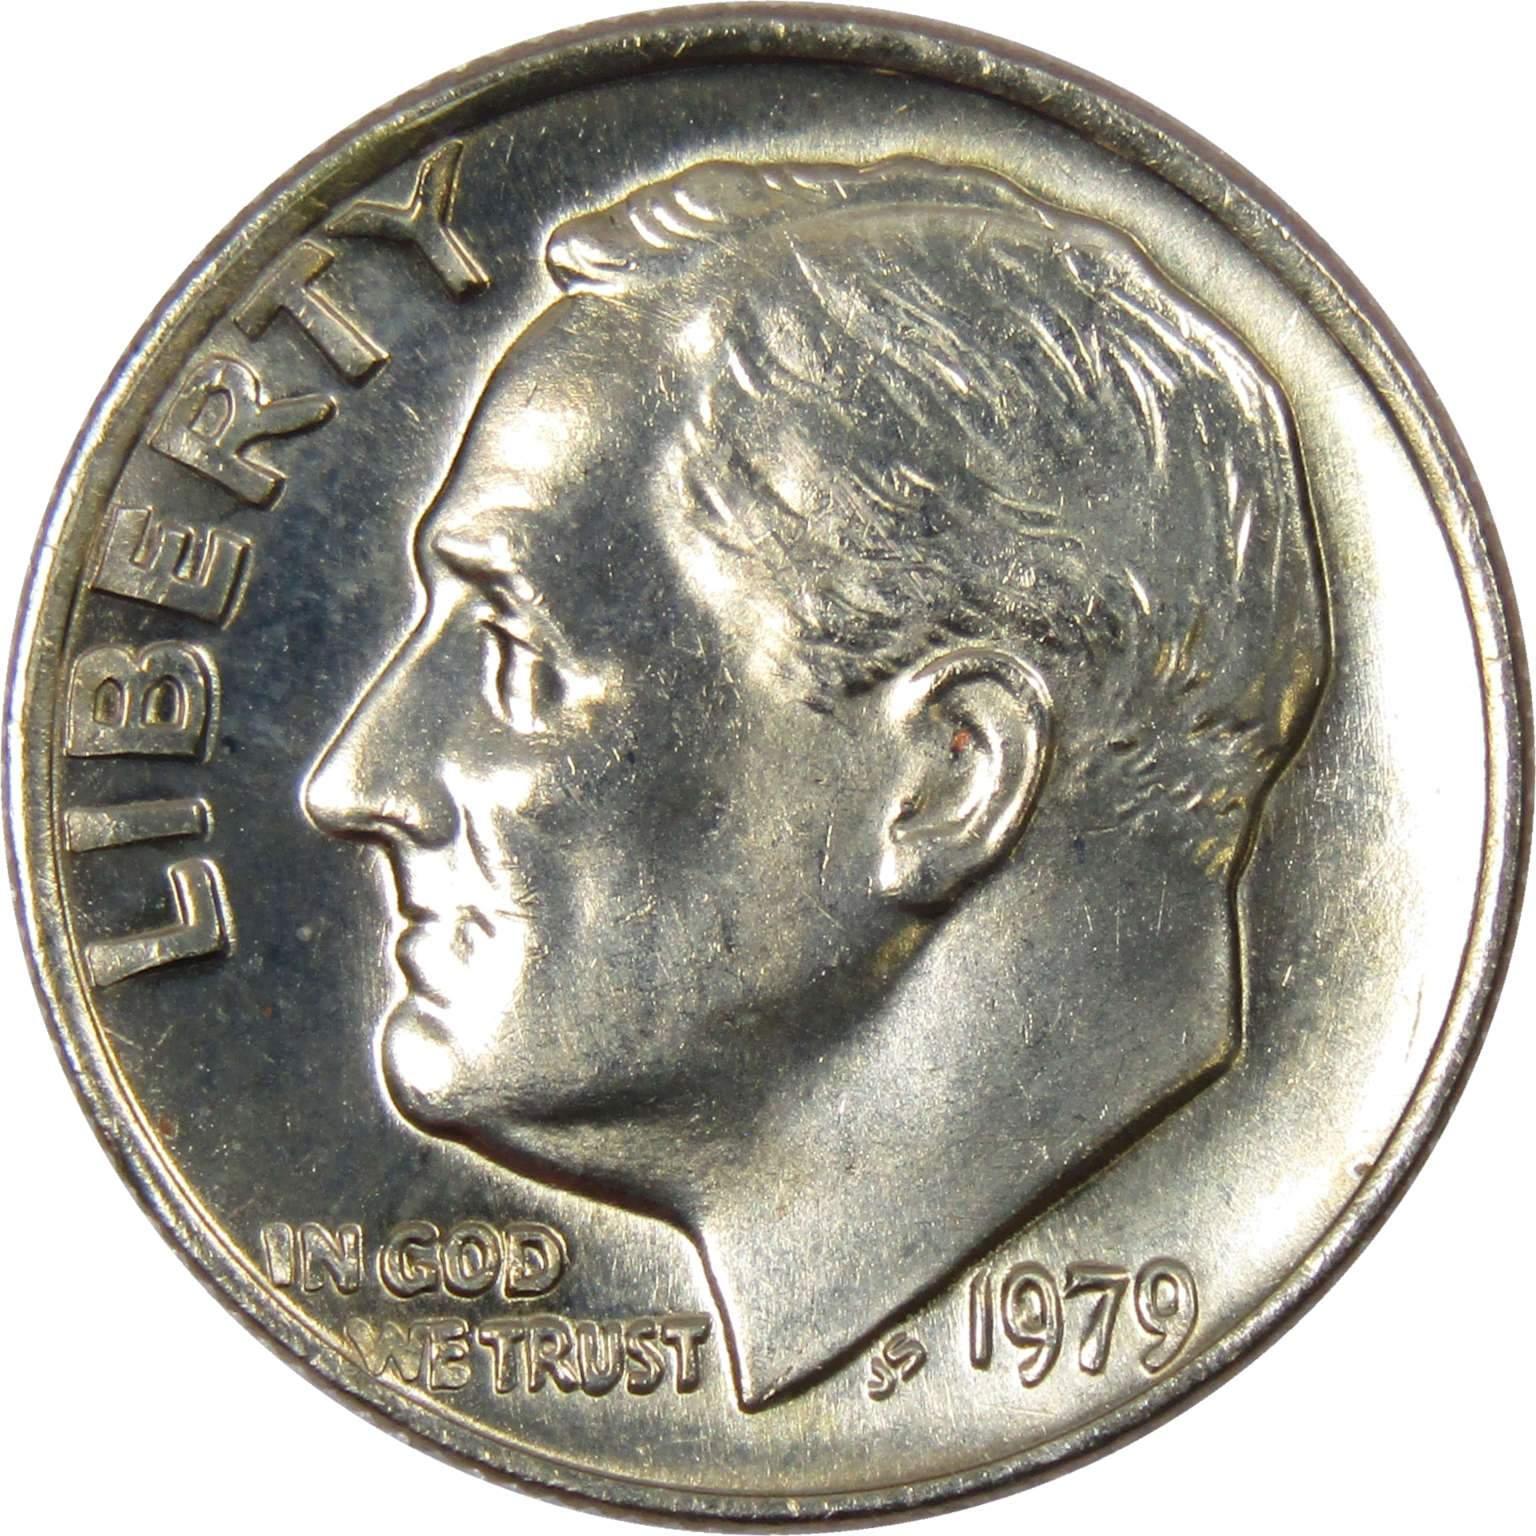 1979 Roosevelt Dime BU Uncirculated Mint State 10c US Coin Collectible